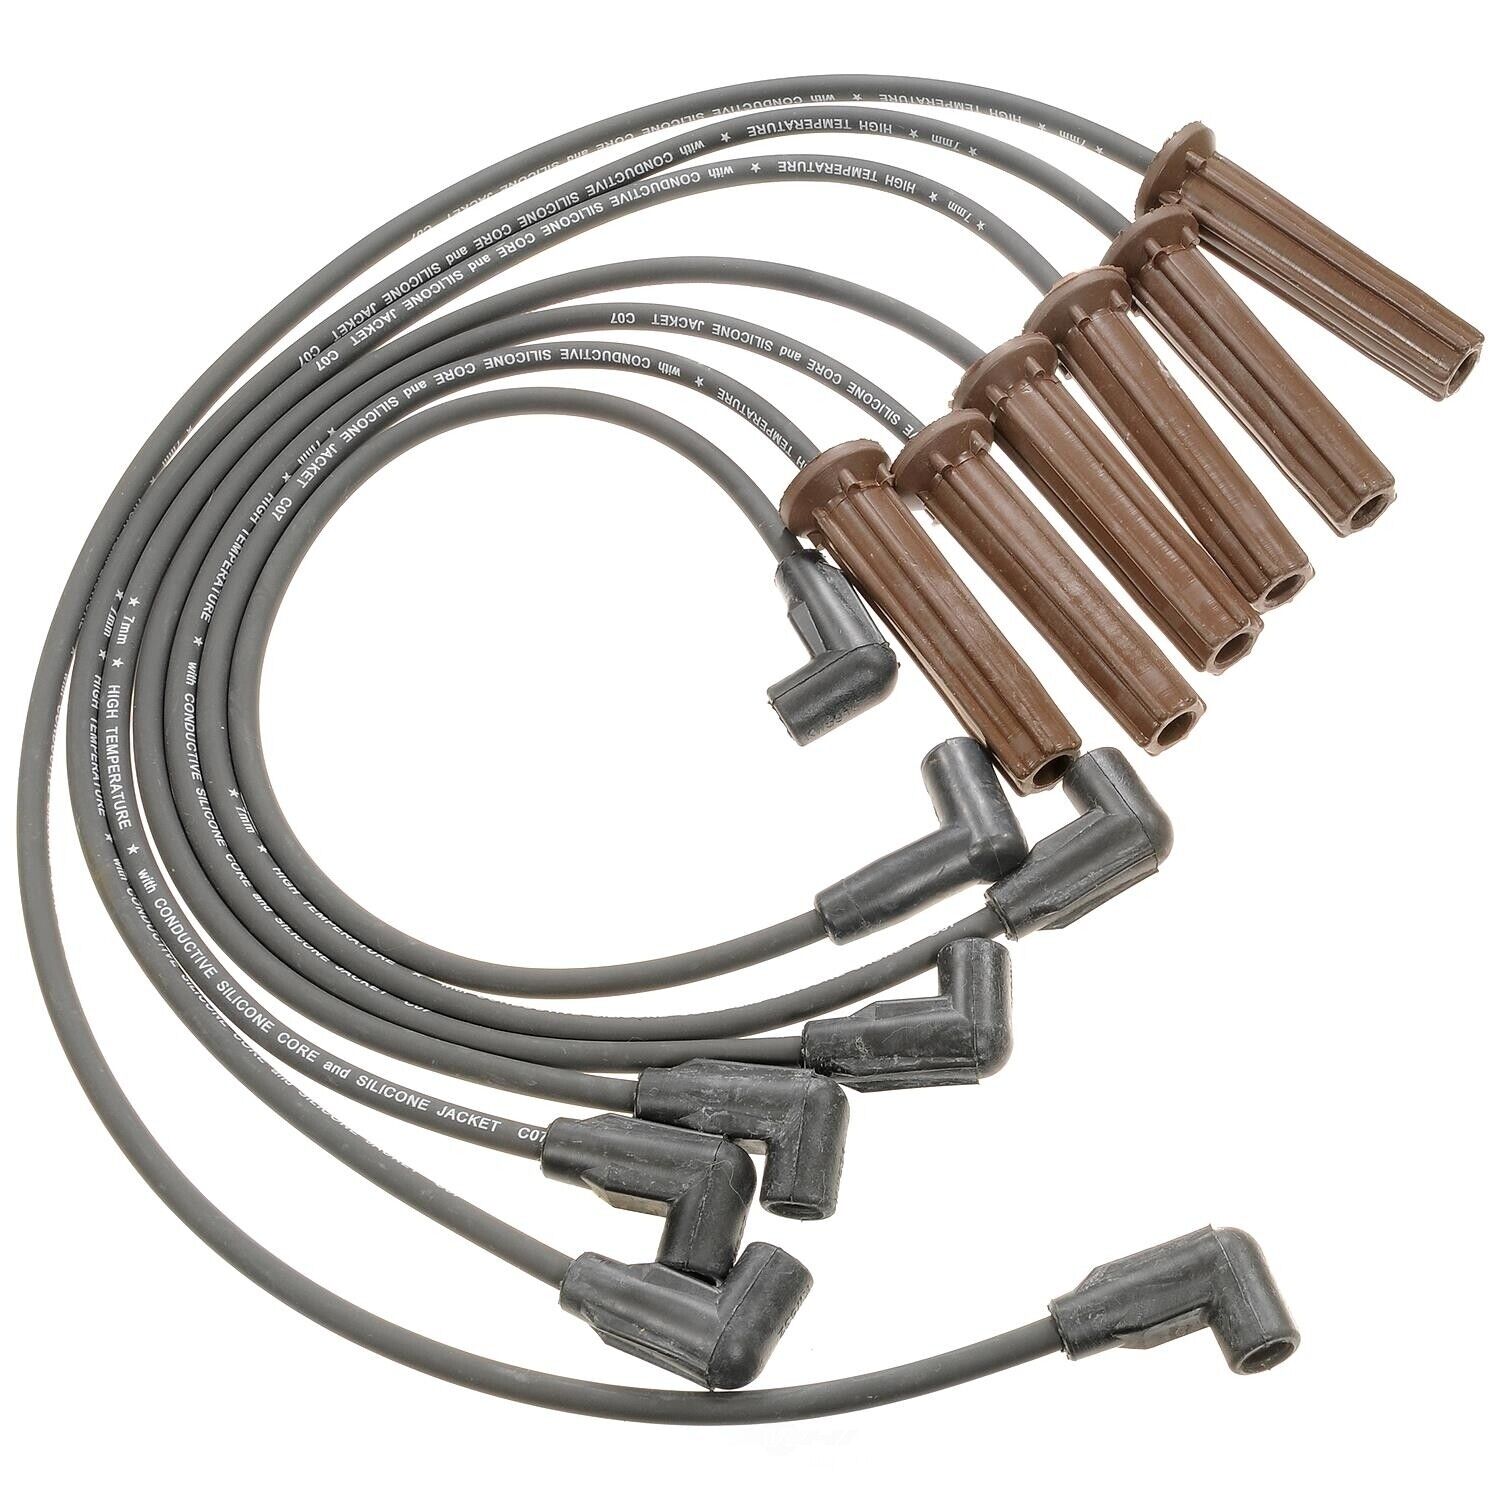 Standard Motor Products 27623 Spark Plug Wire Set